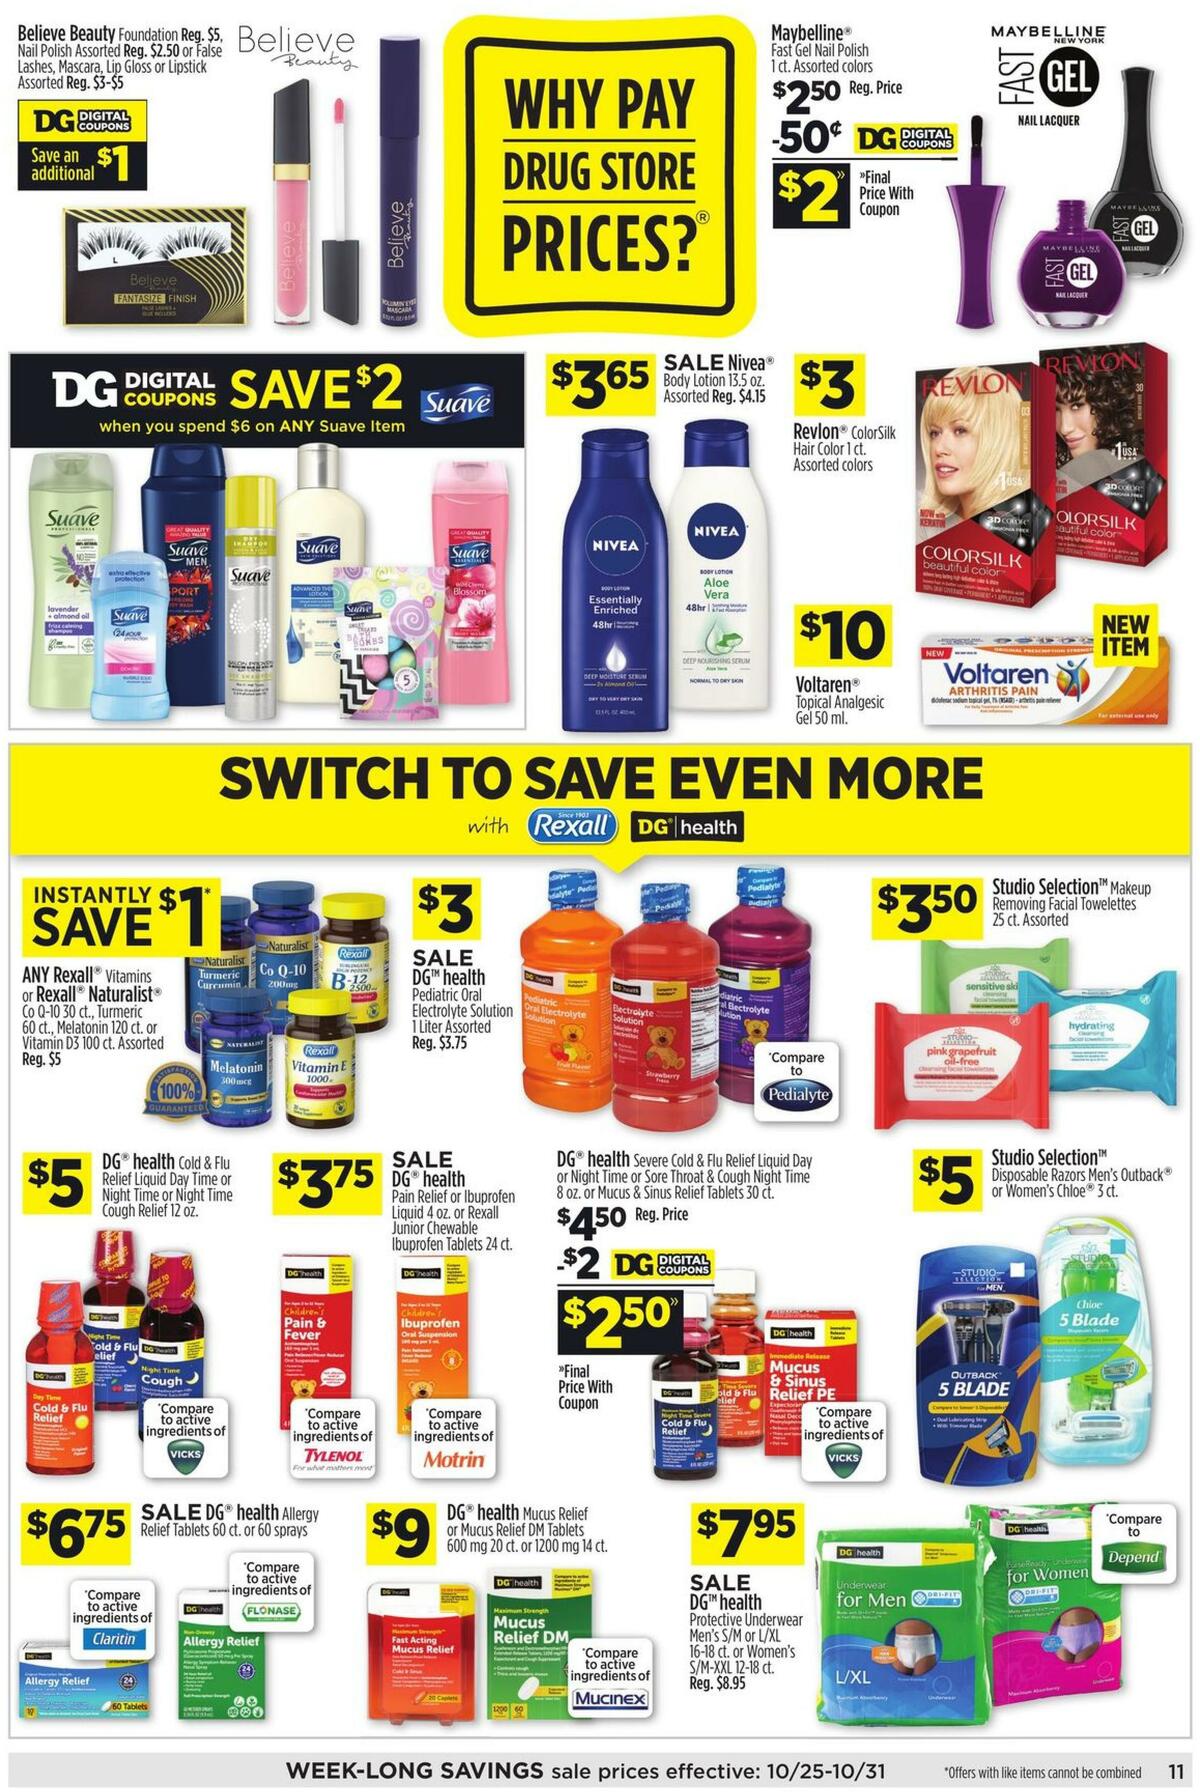 Dollar General Weekly Ad from October 25